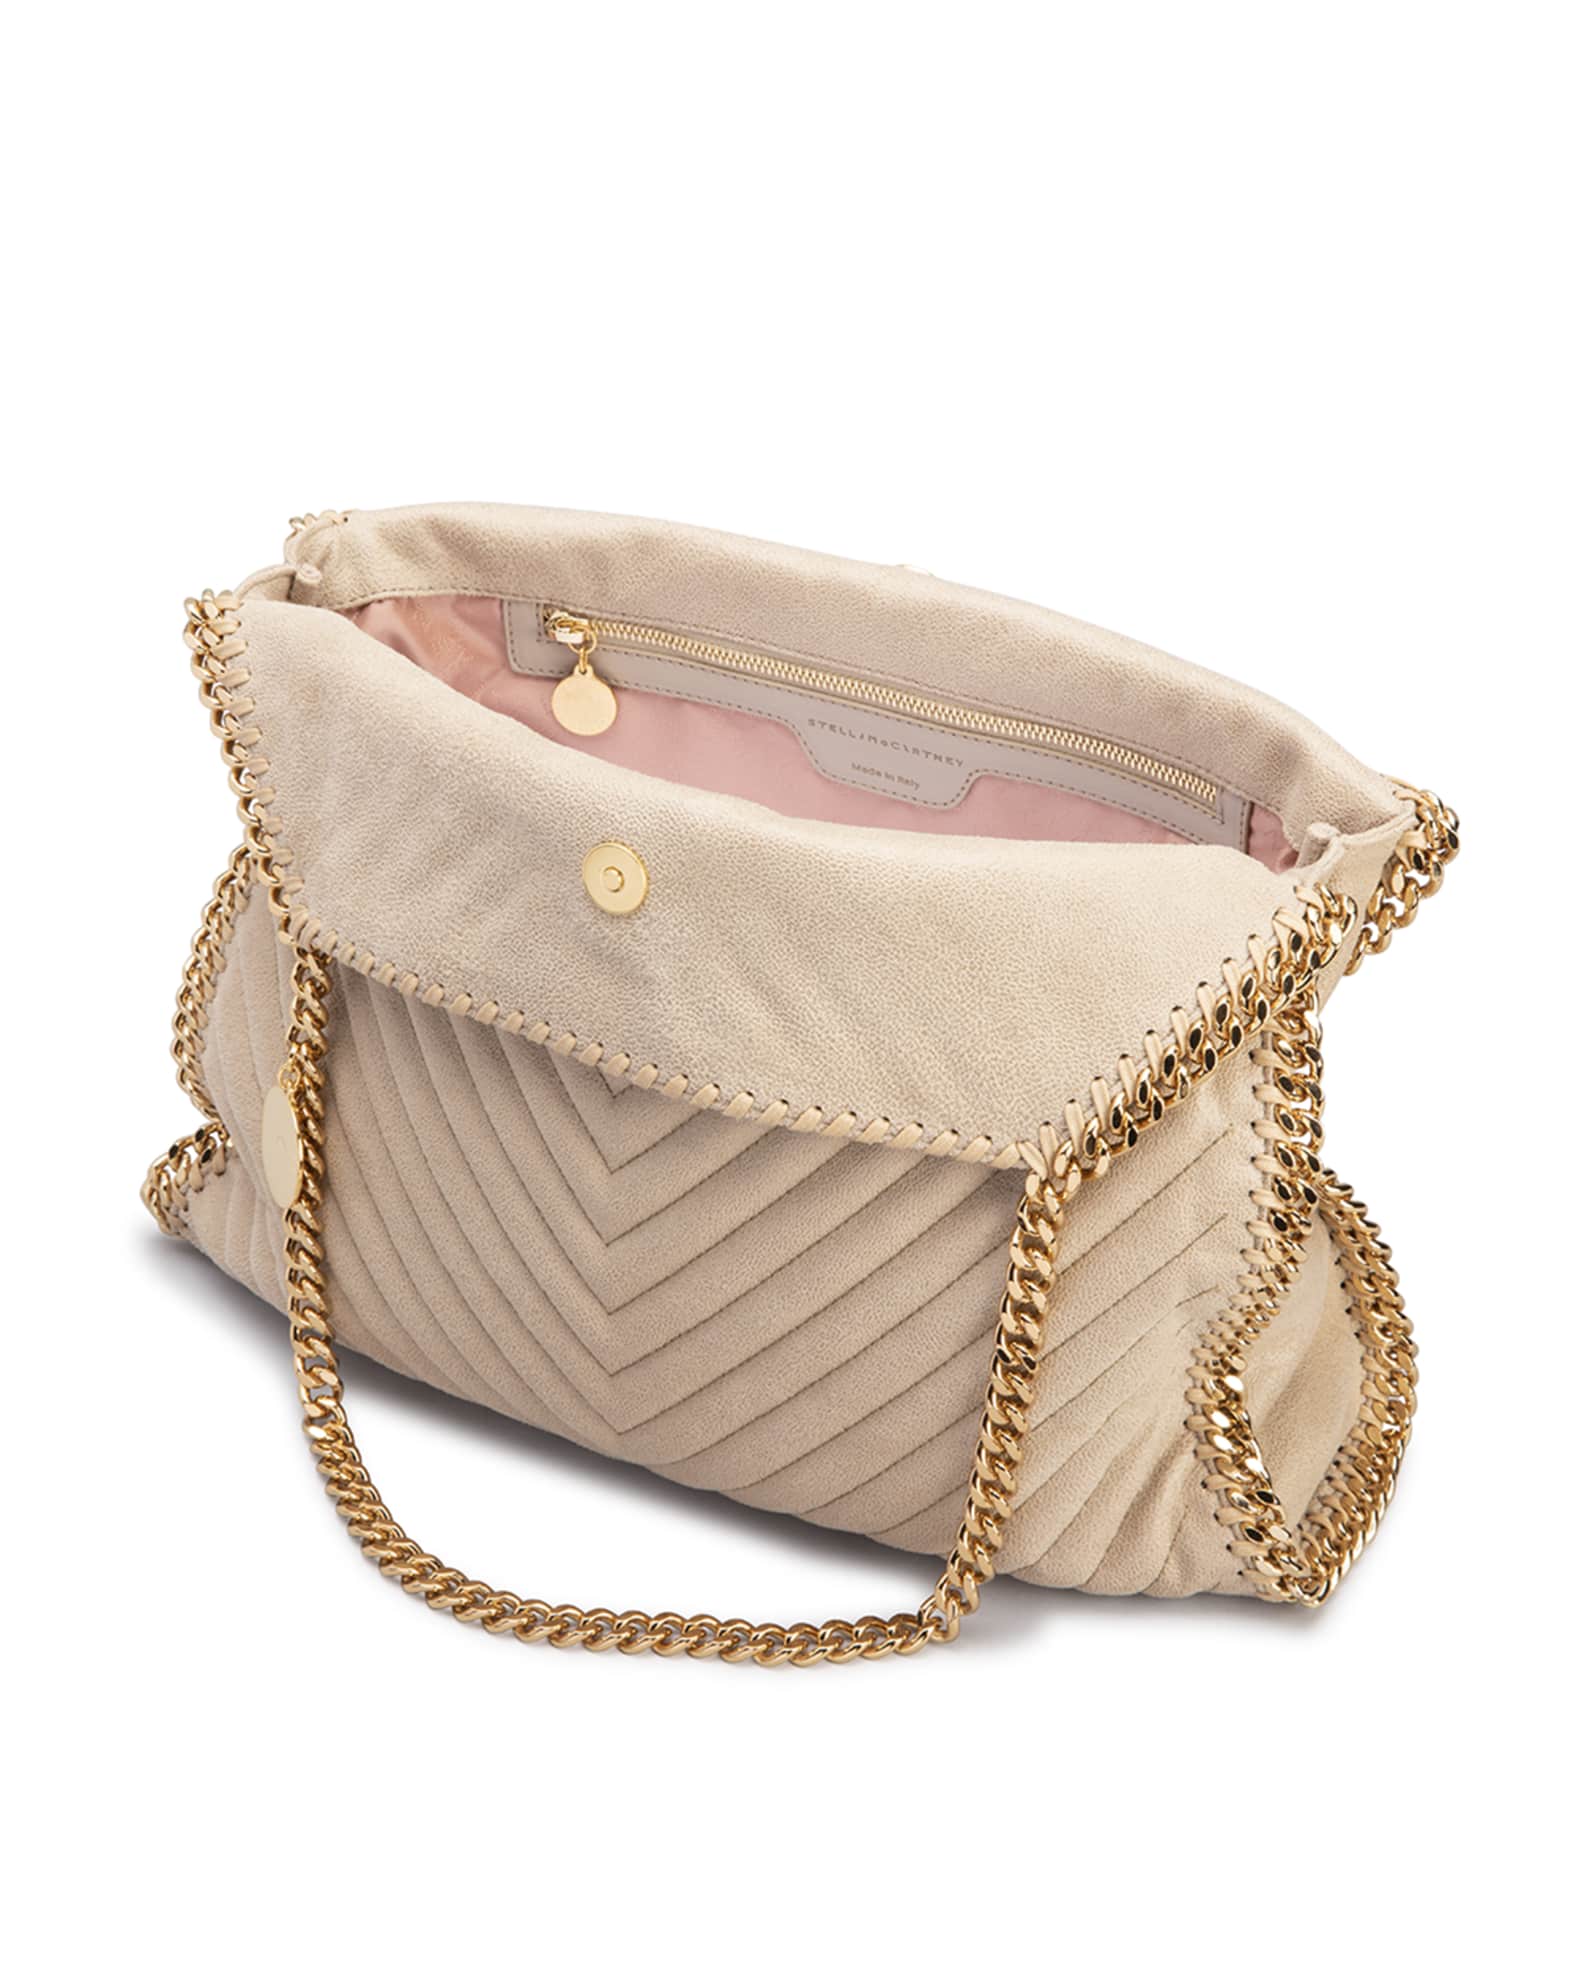 Stella McCartney Small Eco Shaggy Deer Quilted Tote Bag | Neiman Marcus